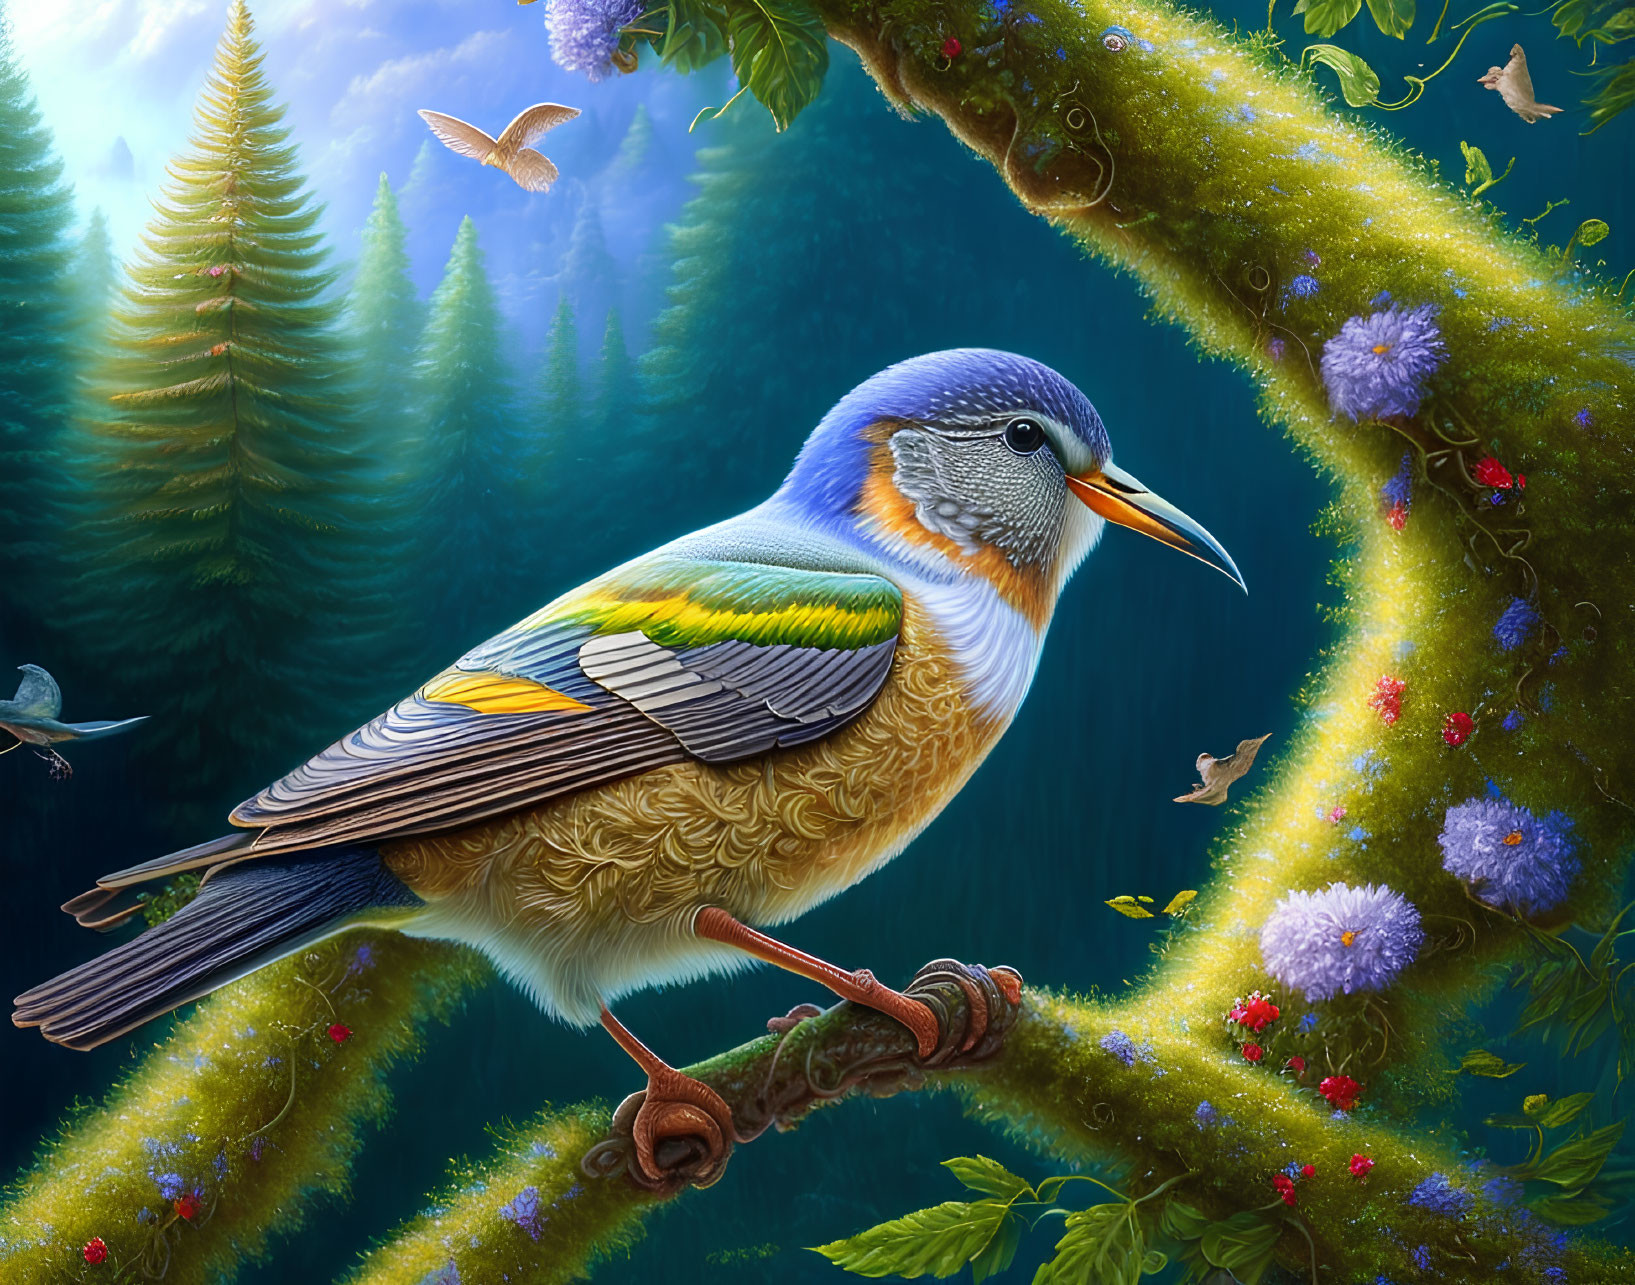 Colorful Bird on Mossy Branch in Fantastical Forest with Butterflies